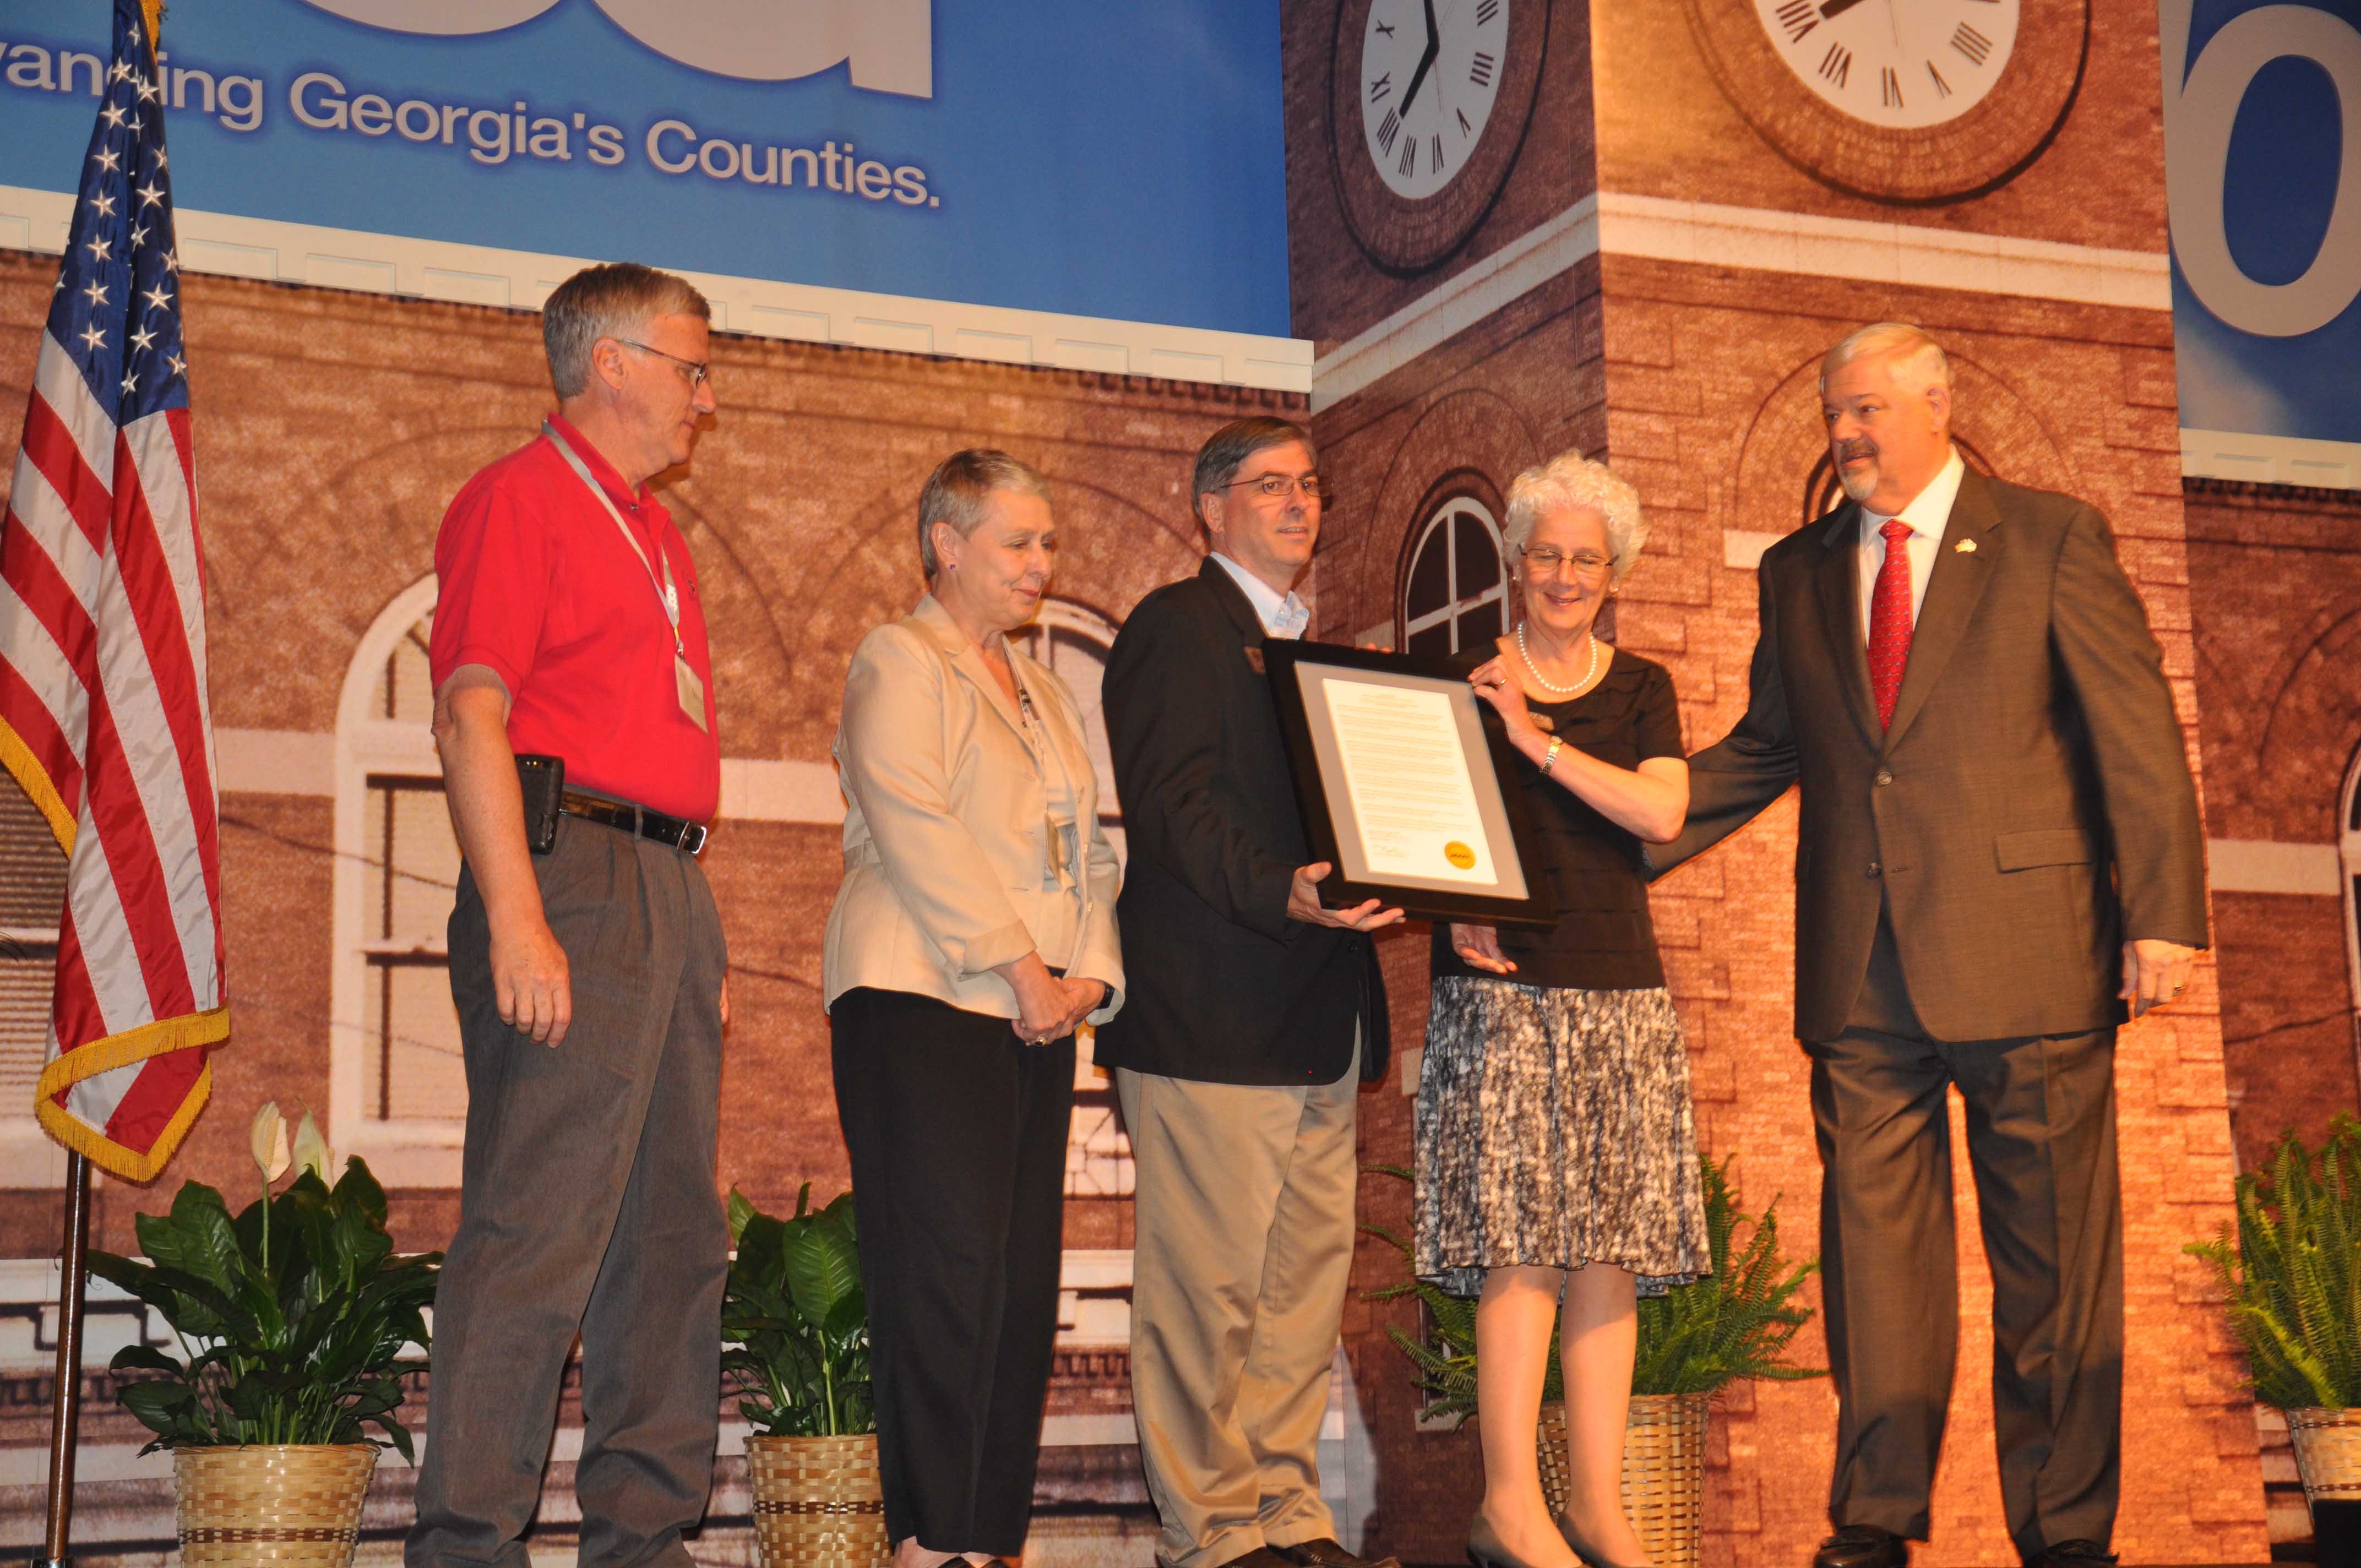 Associate Dean for Extension for the UGA College of Agricultural and Environmental Sciences Beverly Sparks accepts a proclamation recognizing the Georgia Association of Agricultural Agents from Mike Berg, outgoing president of the Association County Commissioners of Georgia.